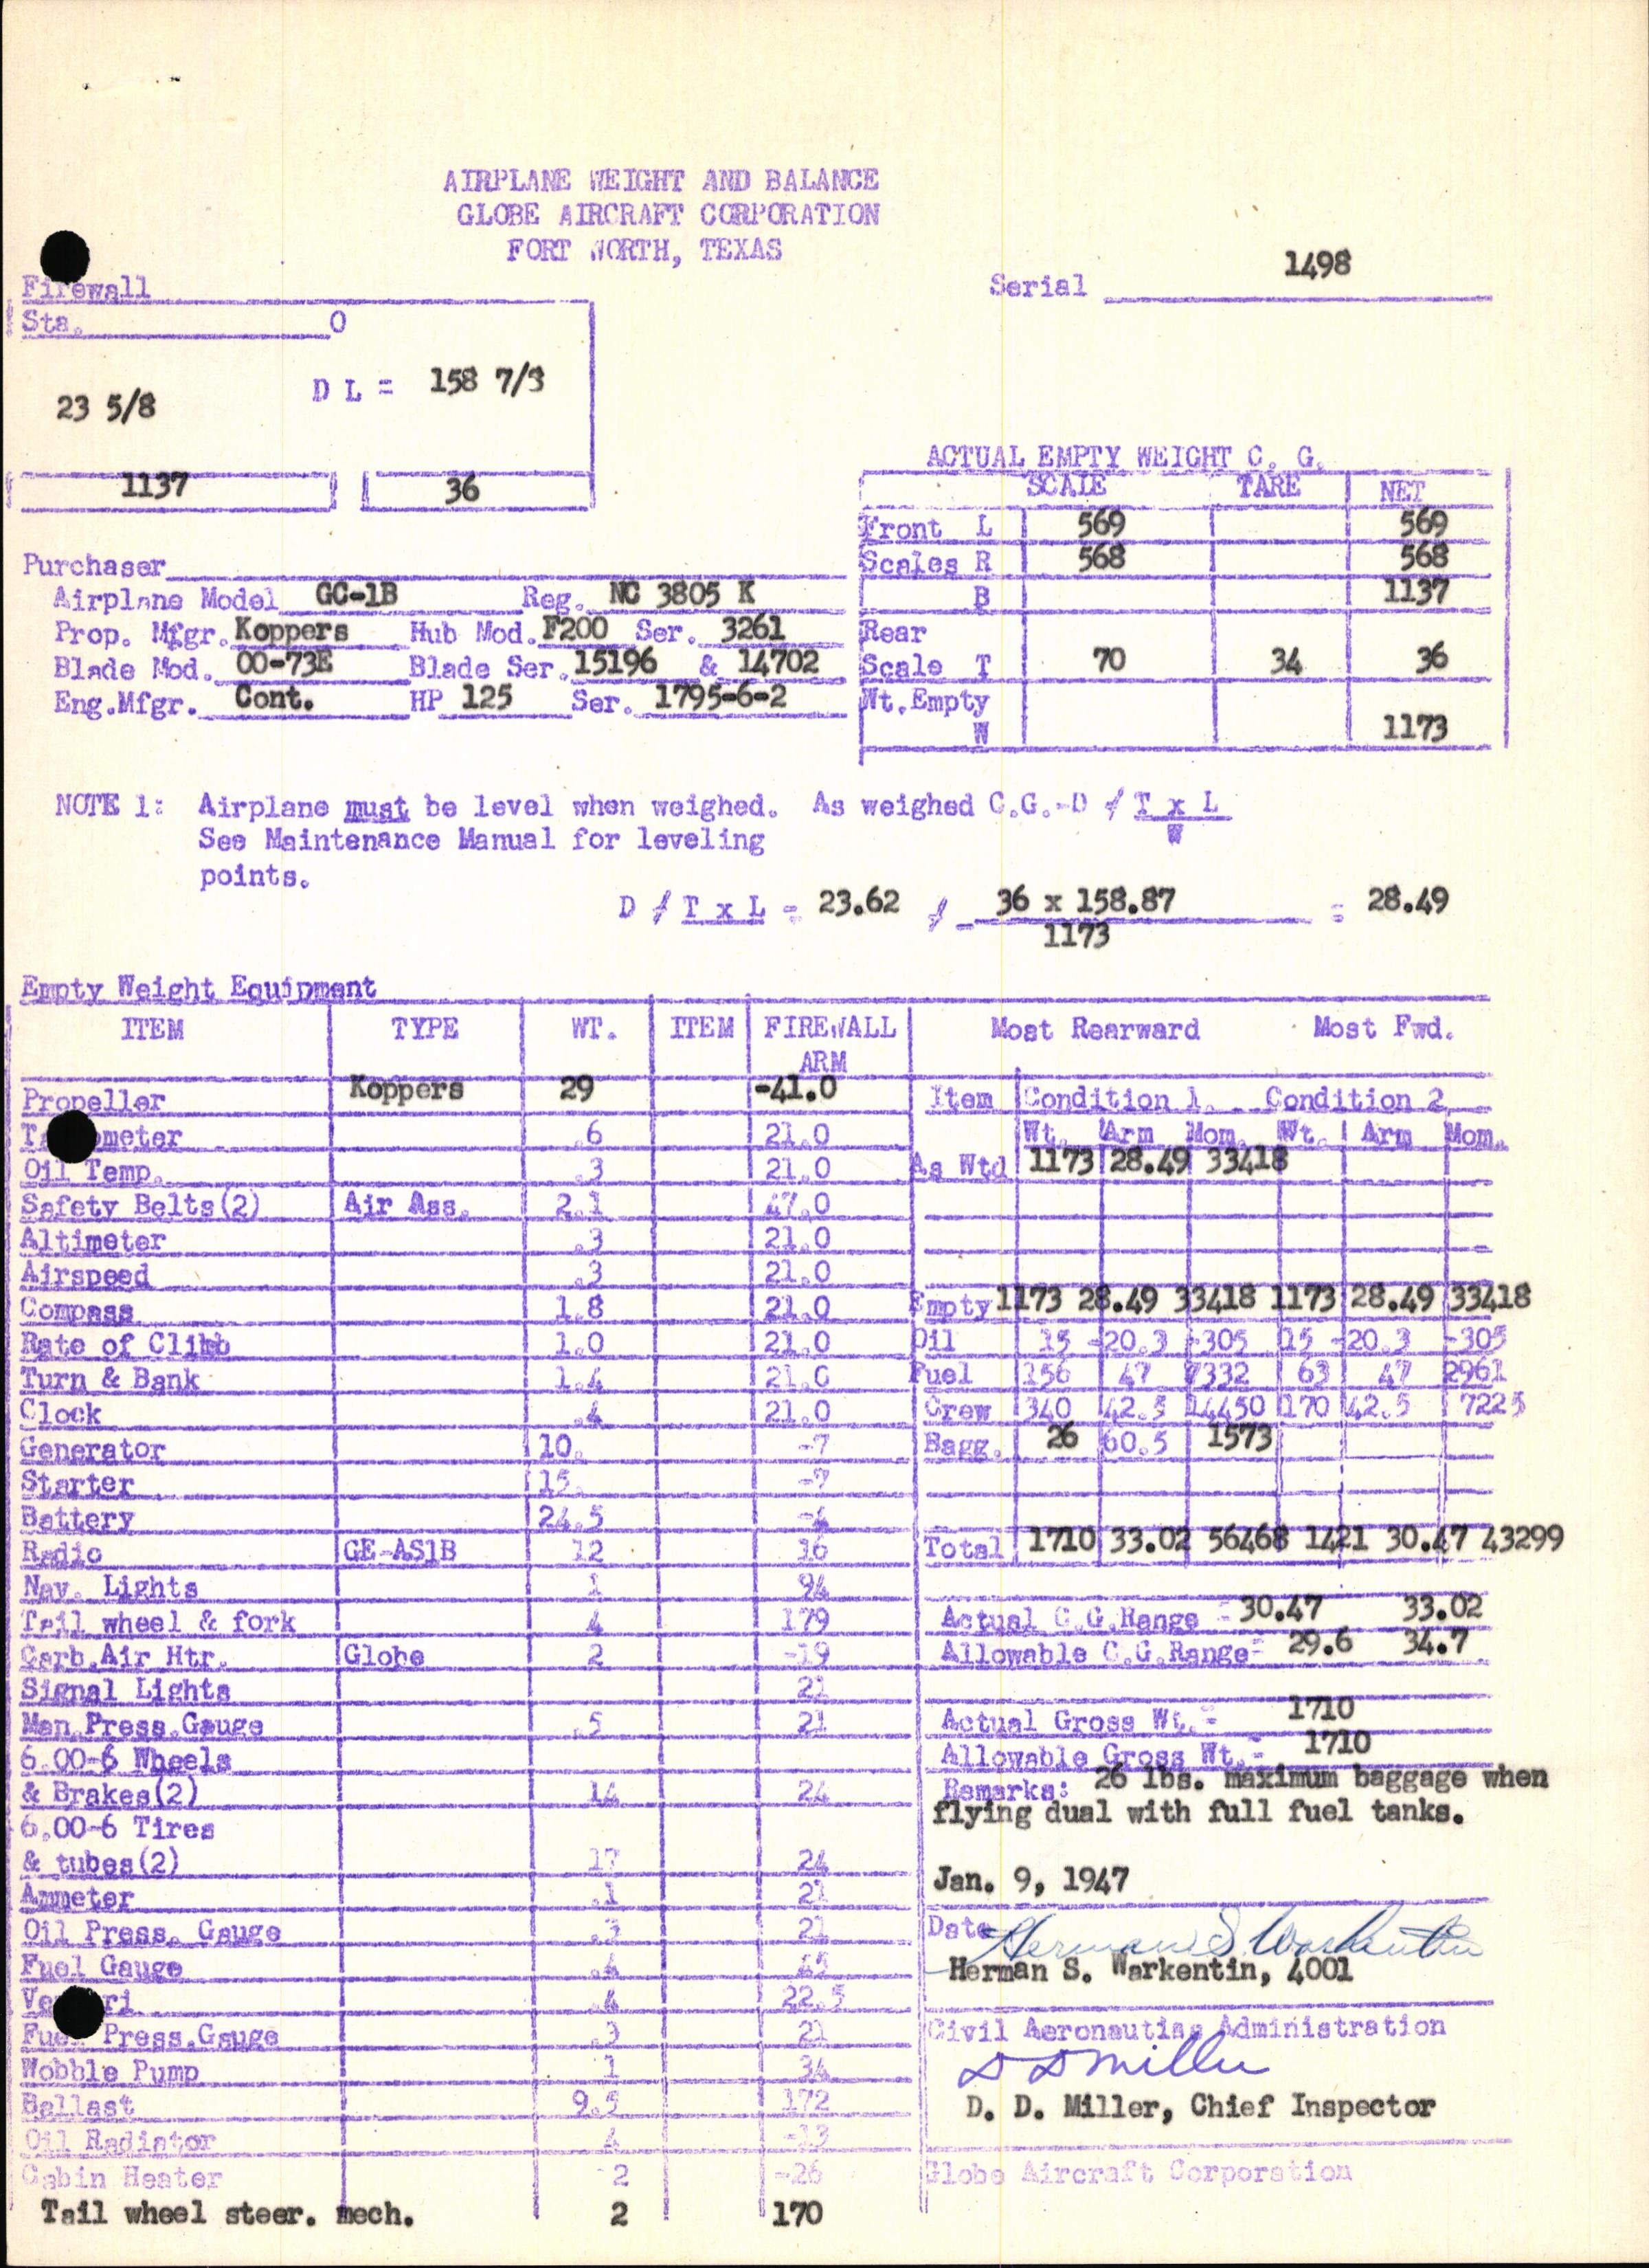 Sample page 5 from AirCorps Library document: Technical Information for Serial Number 1498